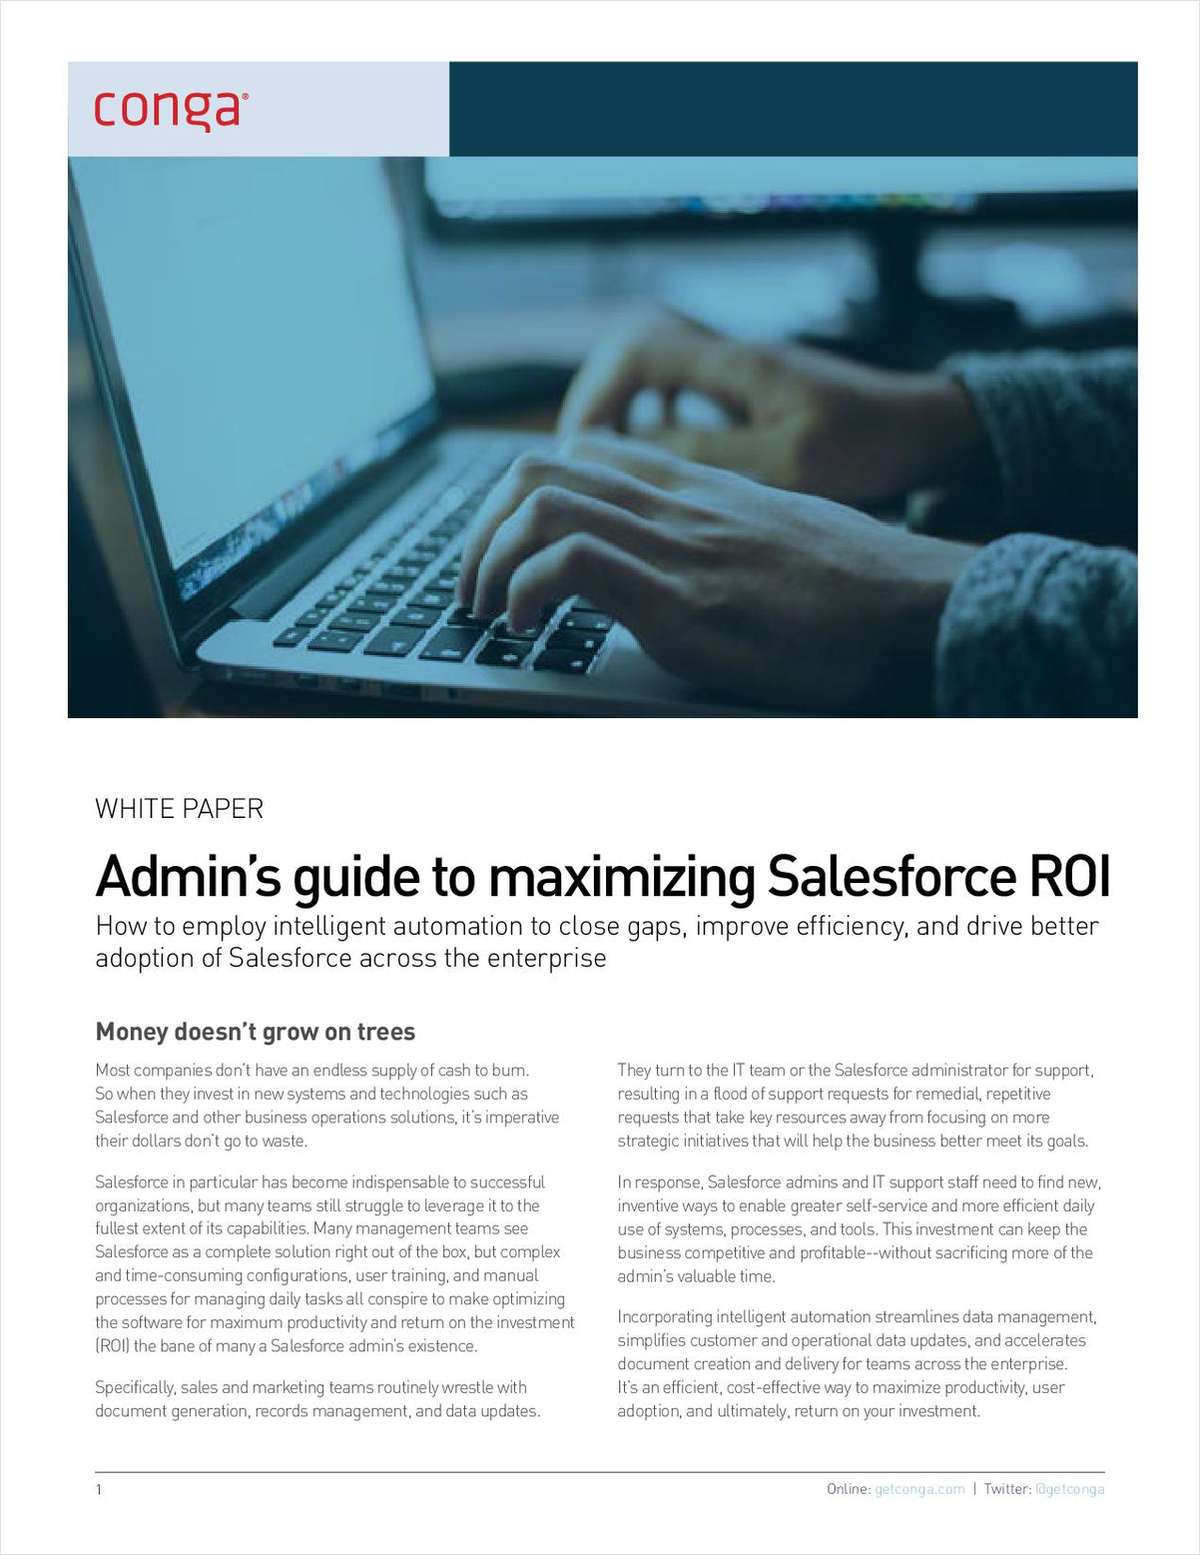 The Admin's Guide to Maximizing Salesforce ROI